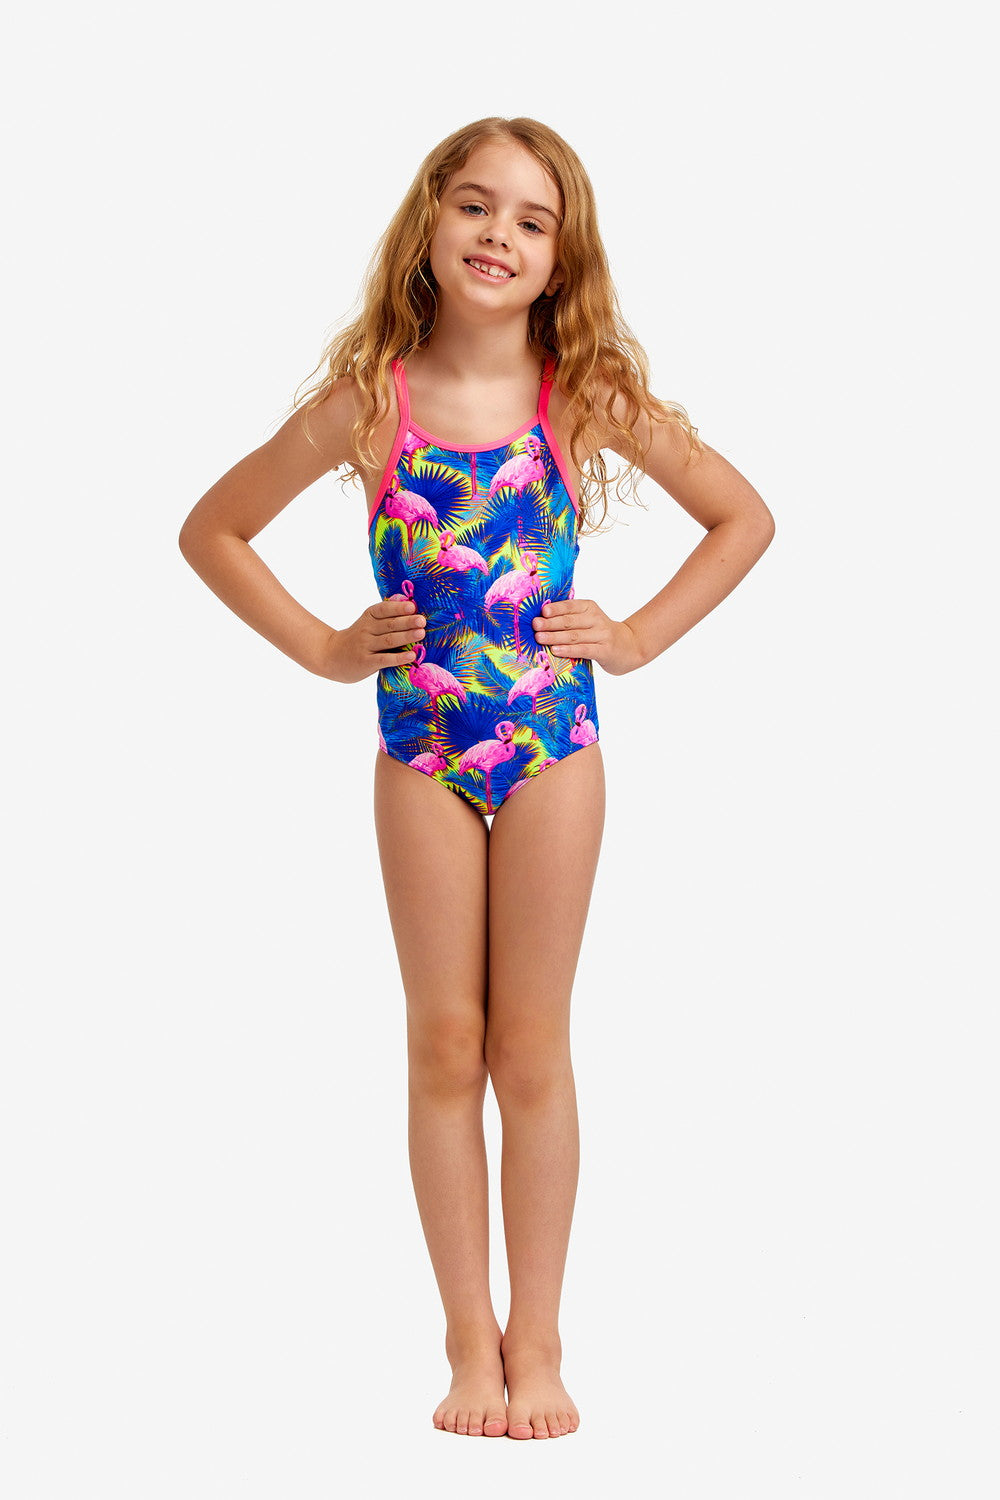 Mingo Magic Printed One Piece Swimsuit FG01T - Toddler Ages 1-7